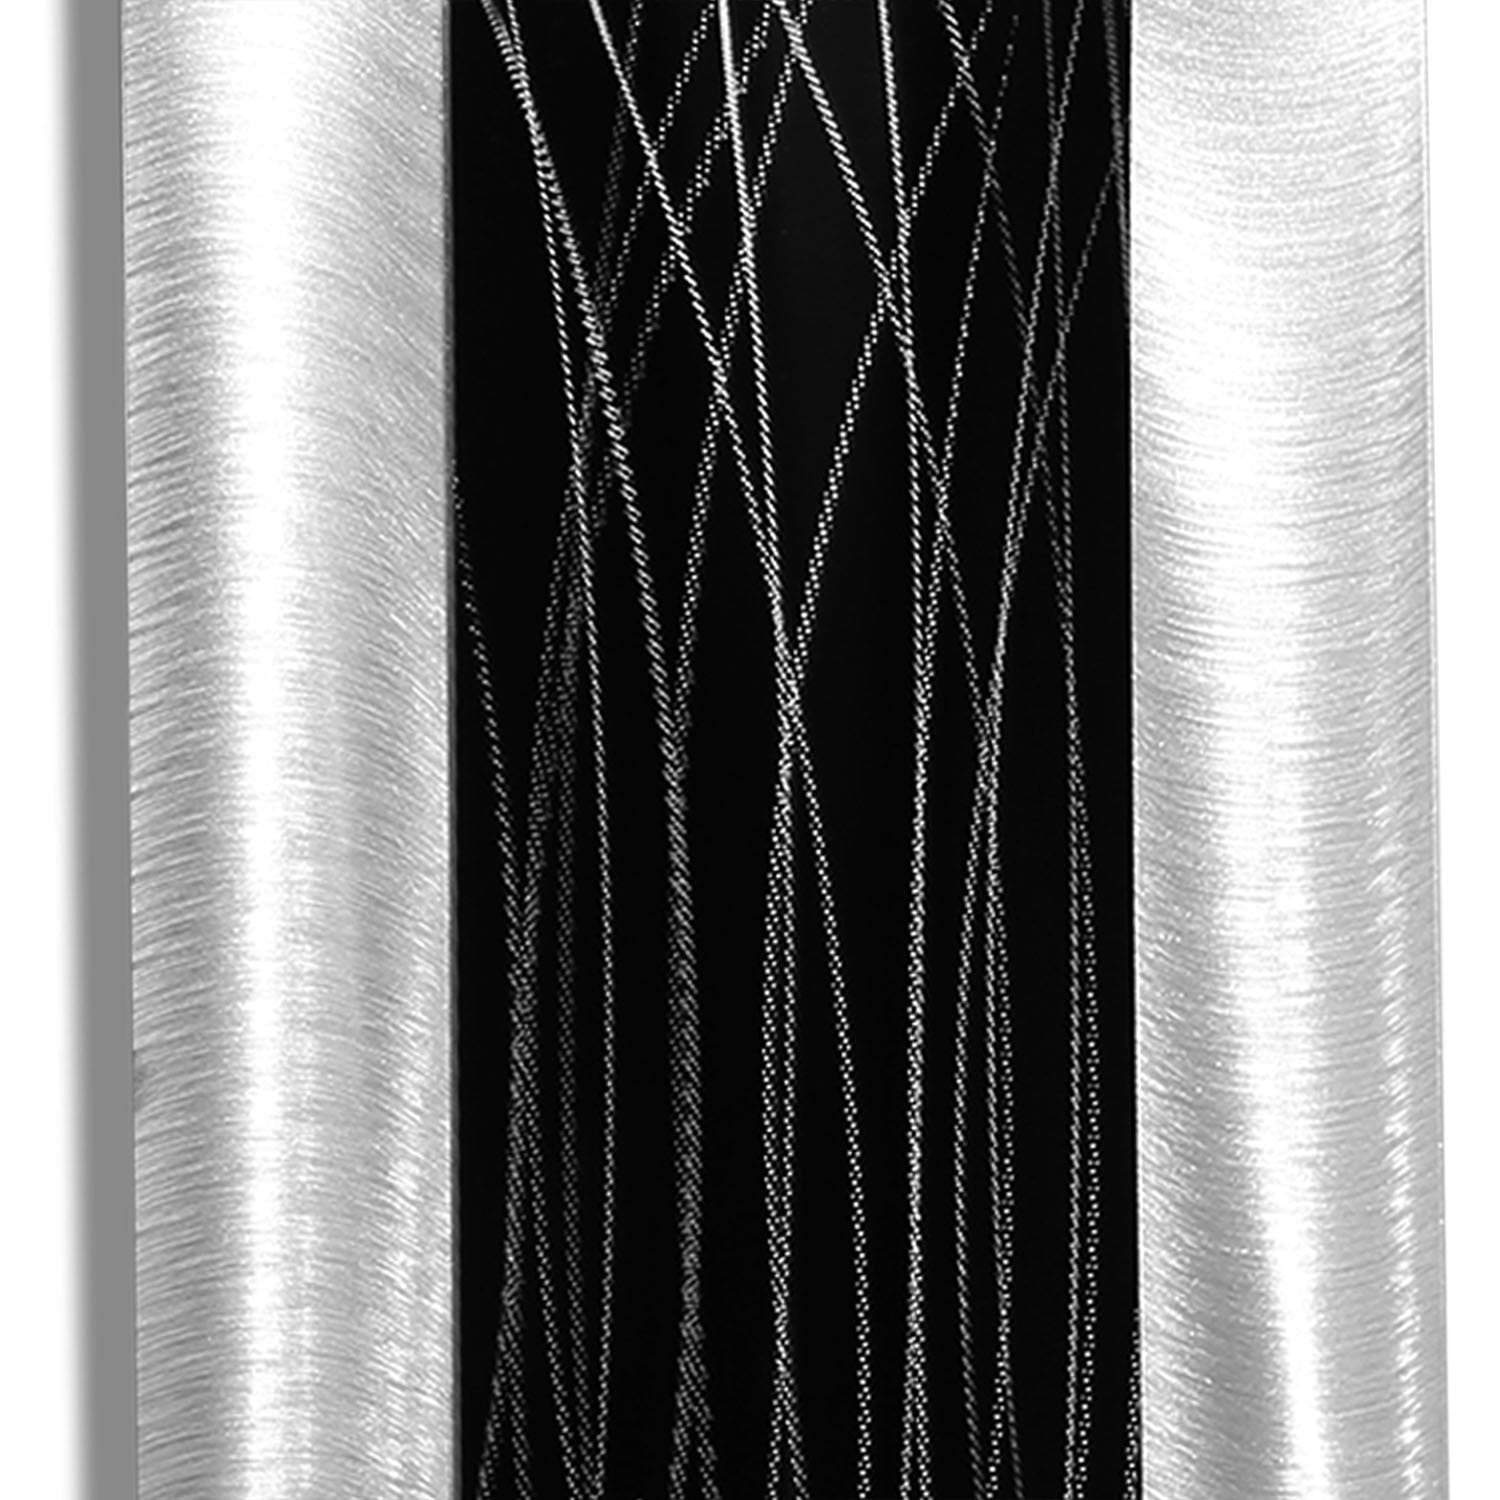  Statements2000 Contemporary Black & Silver Abstract Metal Wall  Art Accent Modern Home Decor, Set of Three - Trifecta by Jon Allen : Home &  Kitchen